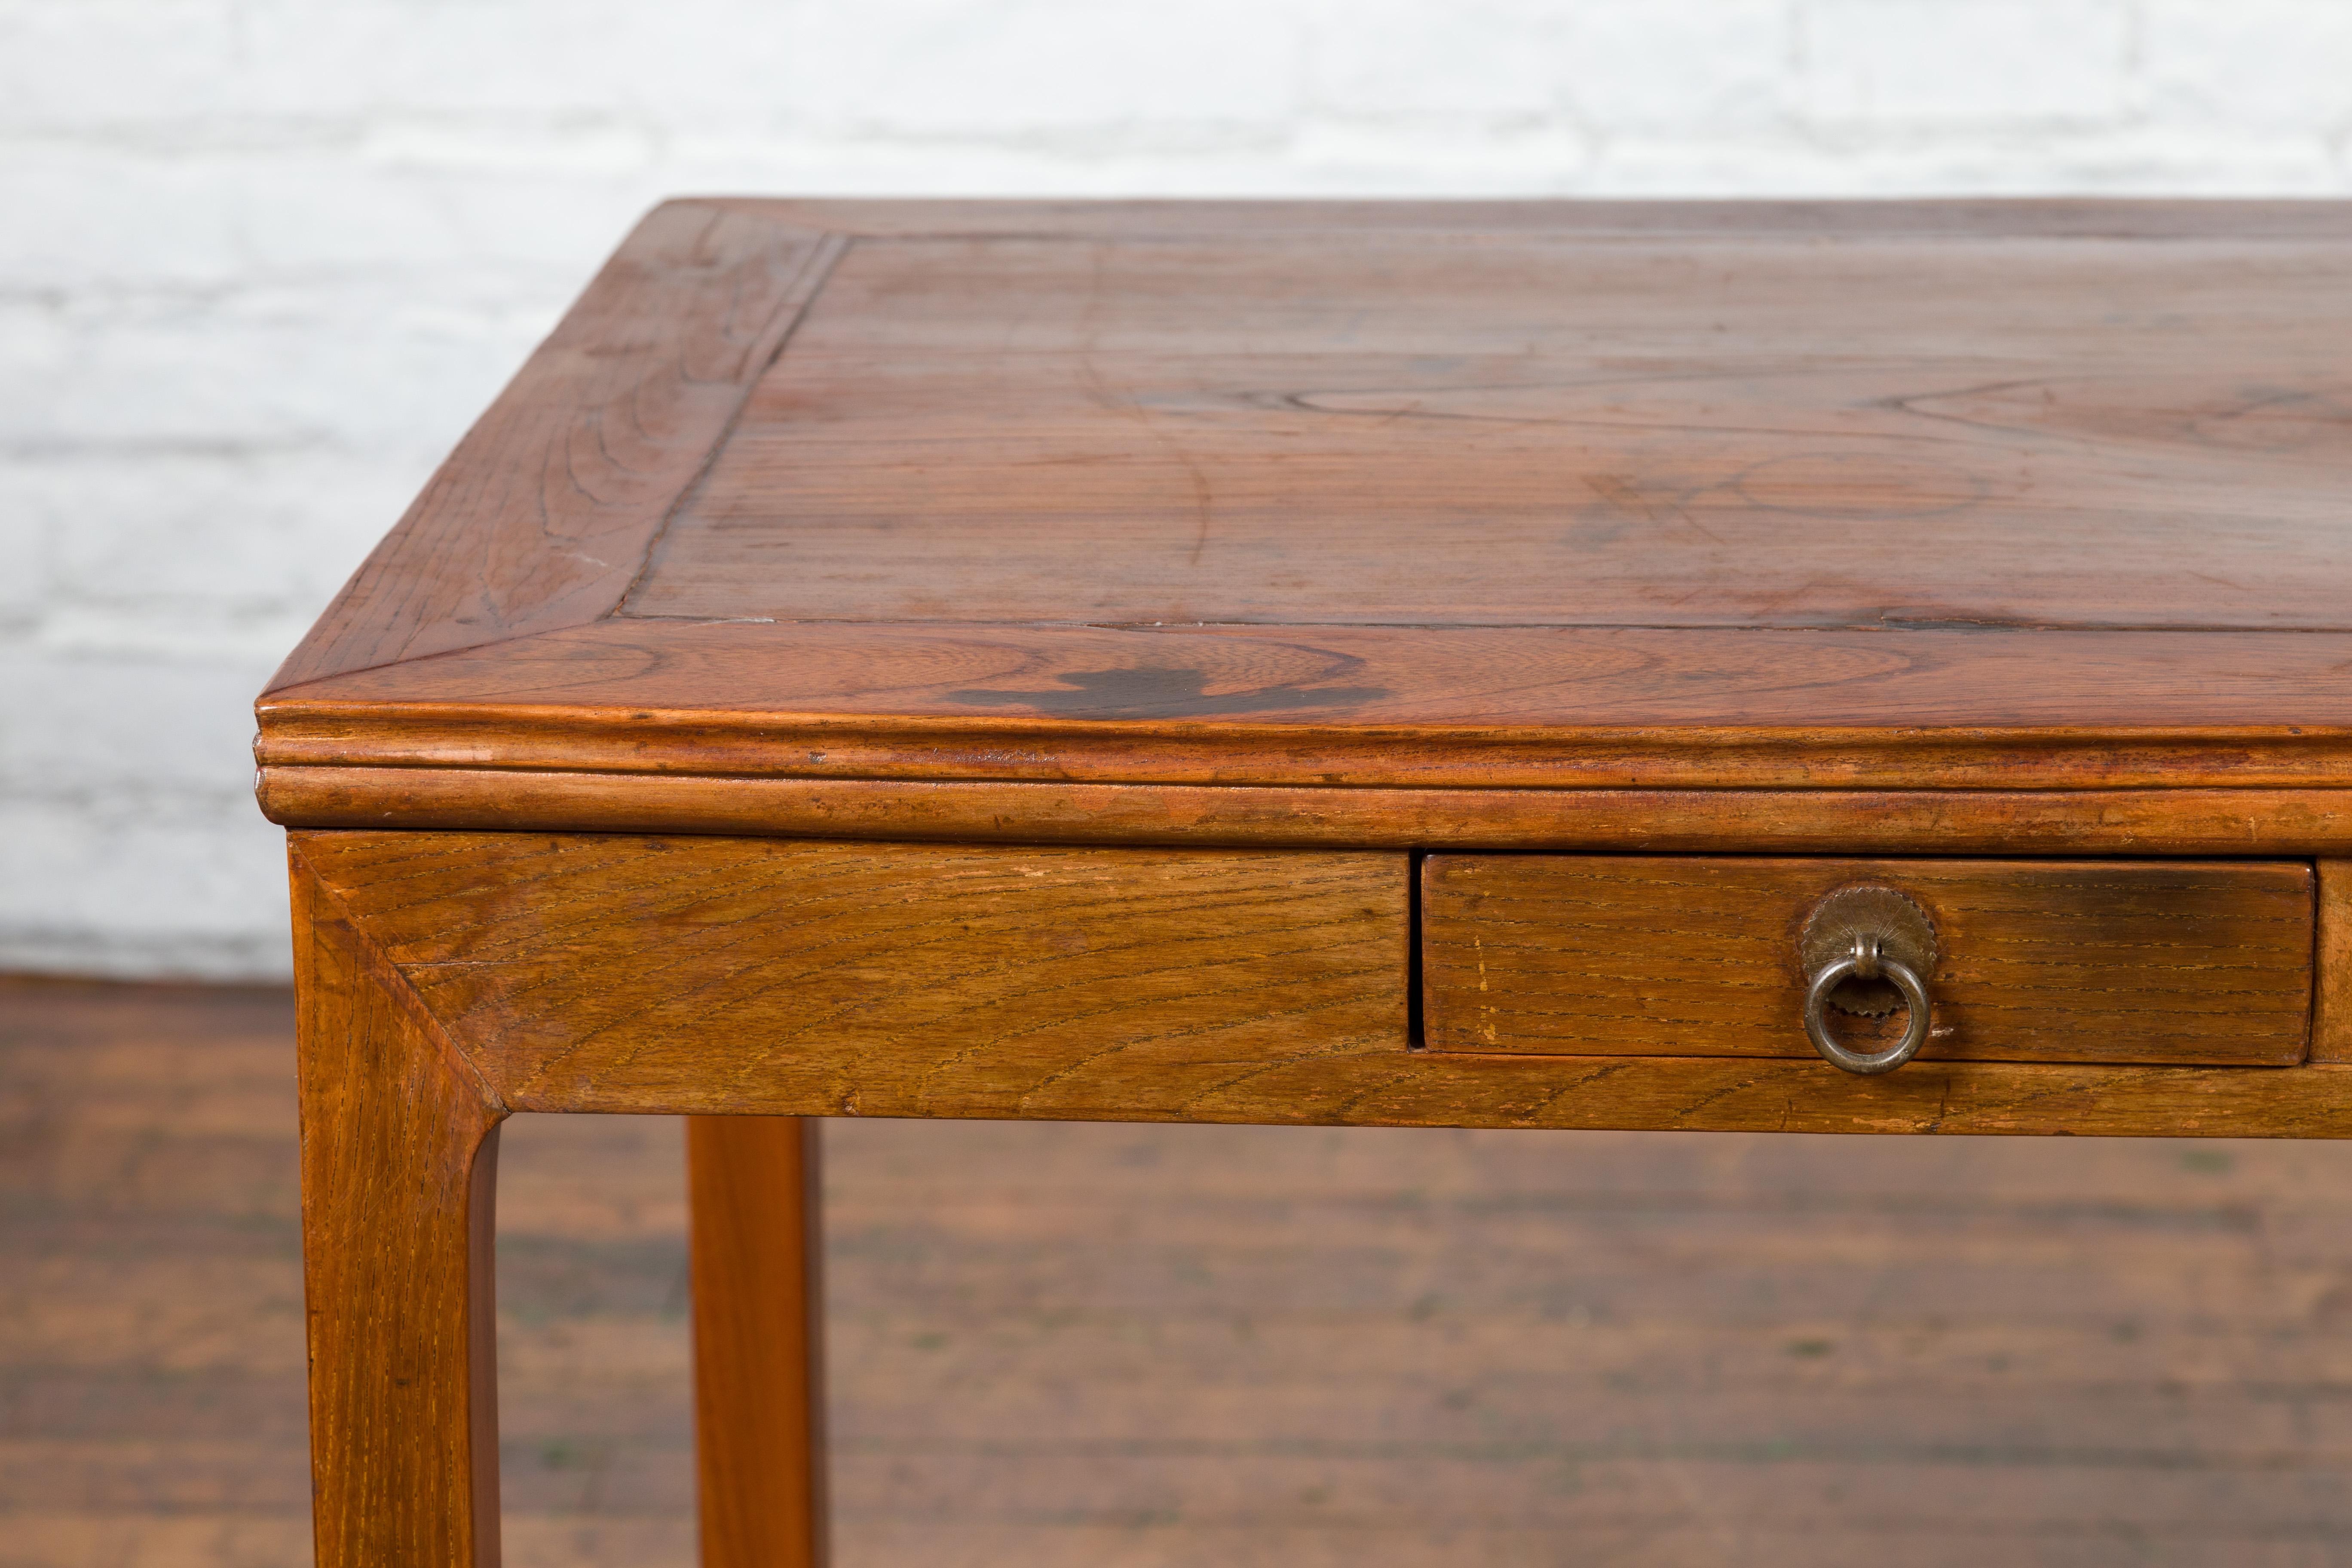 19th Century Chinese Qing Dynasty Desk with Three Drawers and Horse Hoof Feet 1